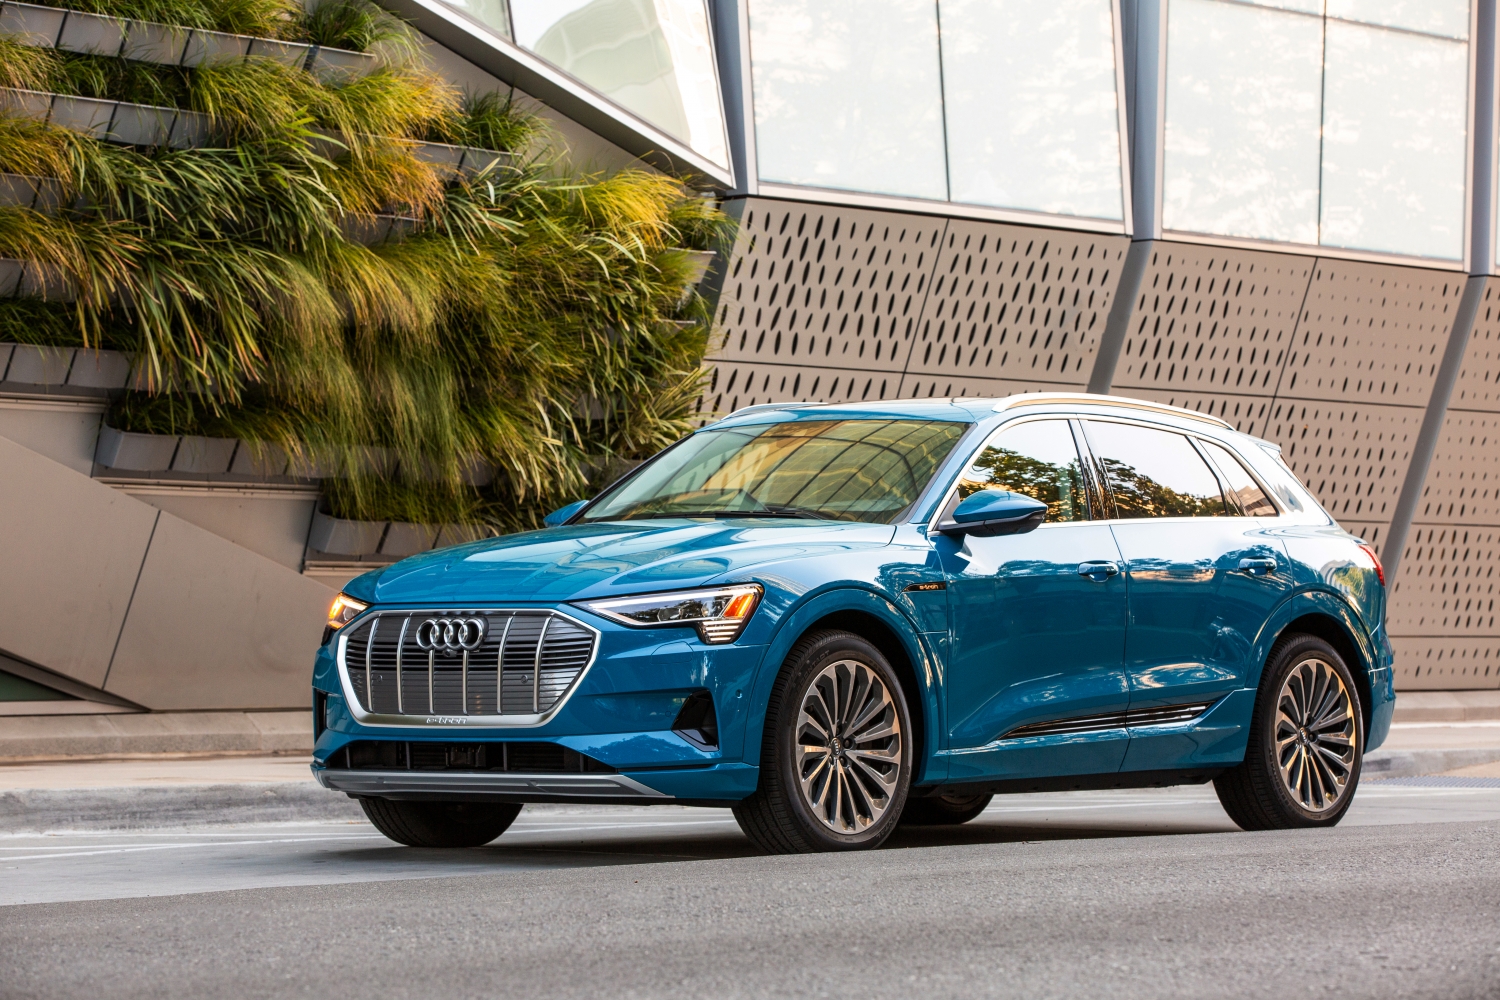 The 2021 Audi e-tron is one of the 10 best cars of 2021 that no one buys